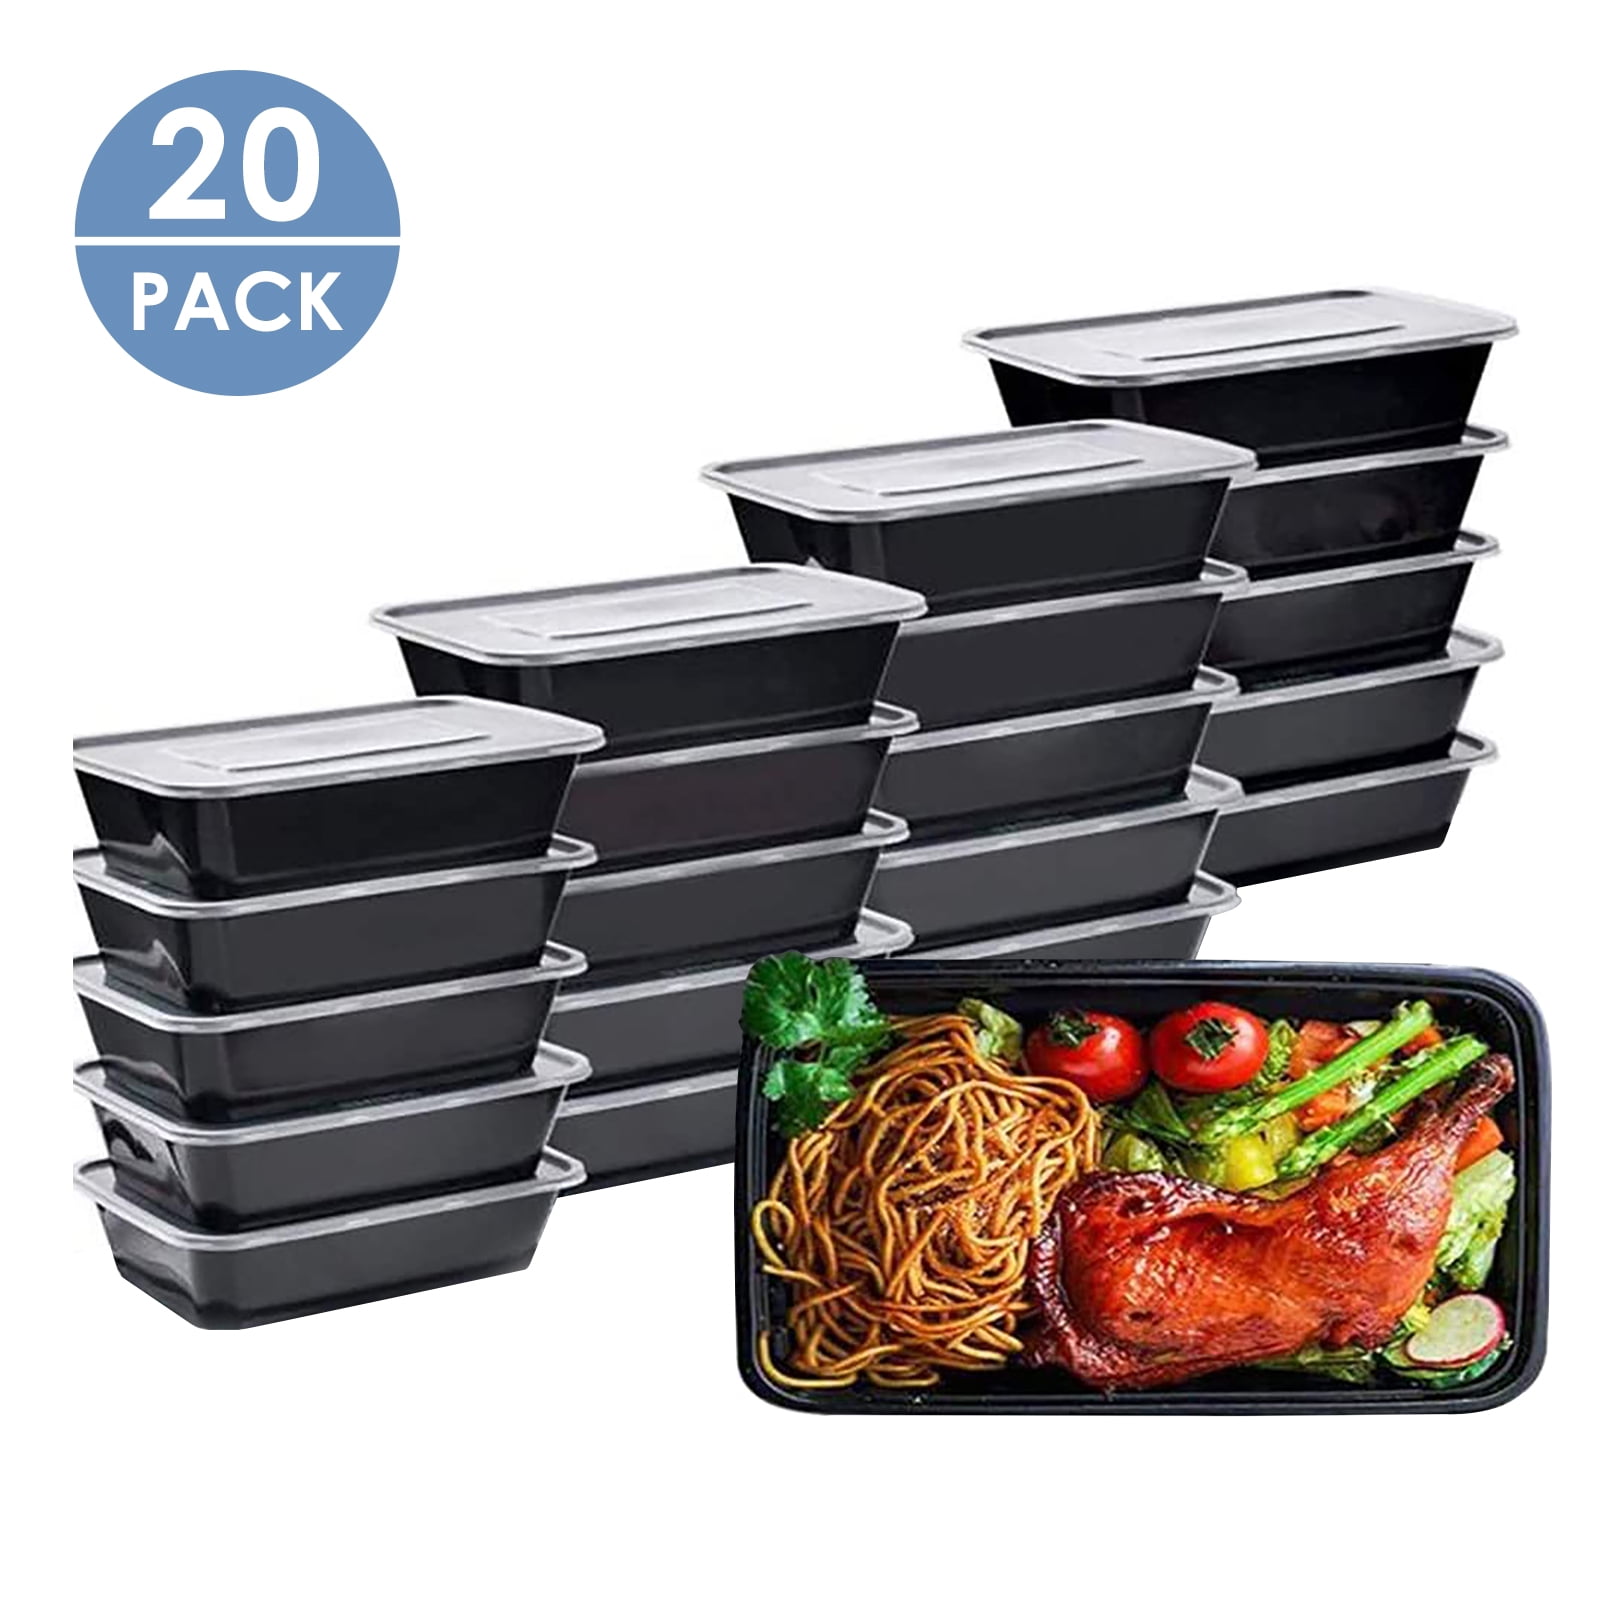 50 Pack (26 Ounce). Meal Prep Food Containers with Lids, Reusable  Microwavable